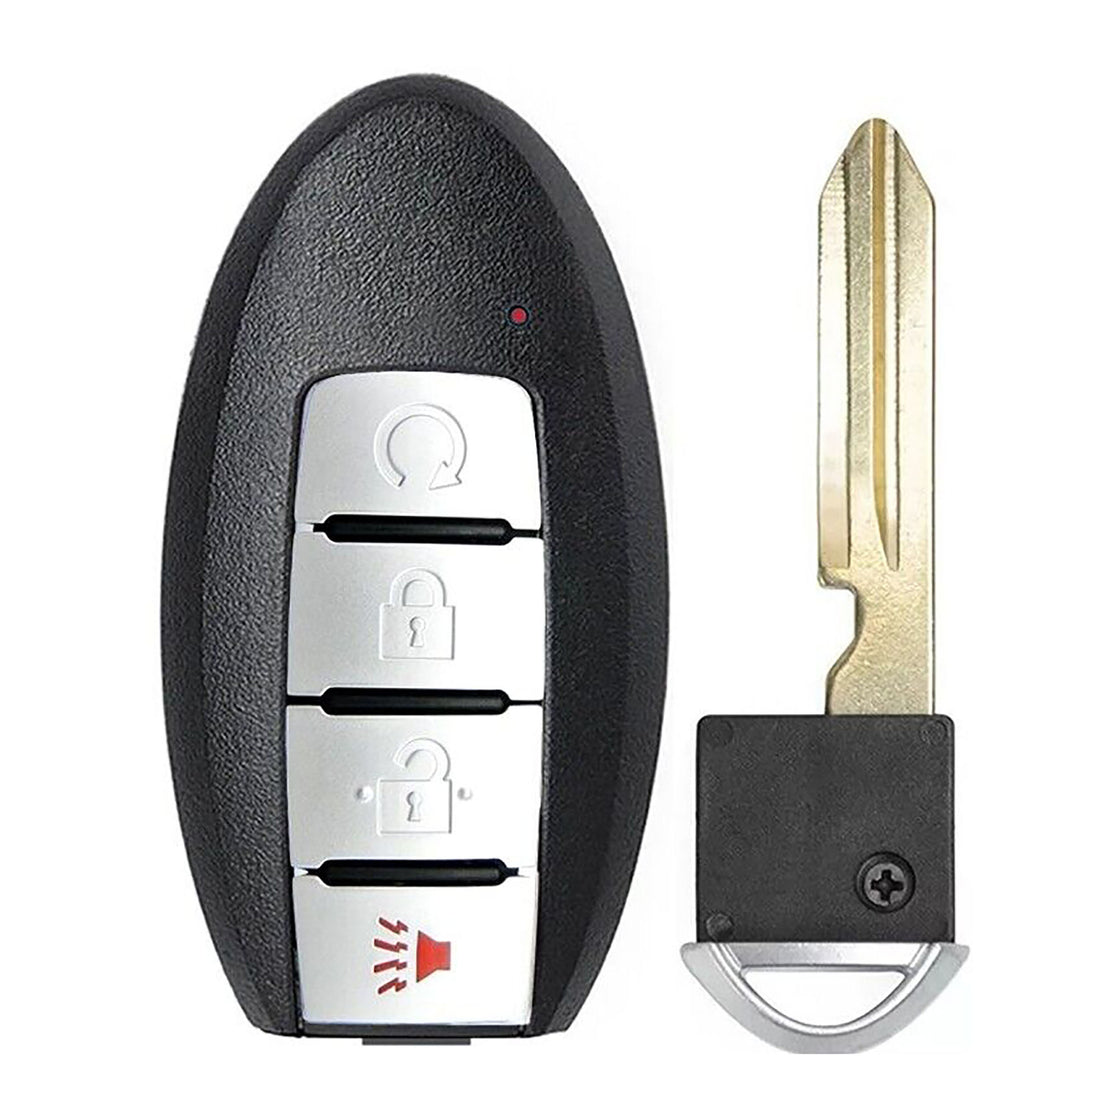 1x New Replacement Proximity Key Fob Compatible with & Fit For Nissan Vehicle. Read Description - MPN KR5TXN7-04